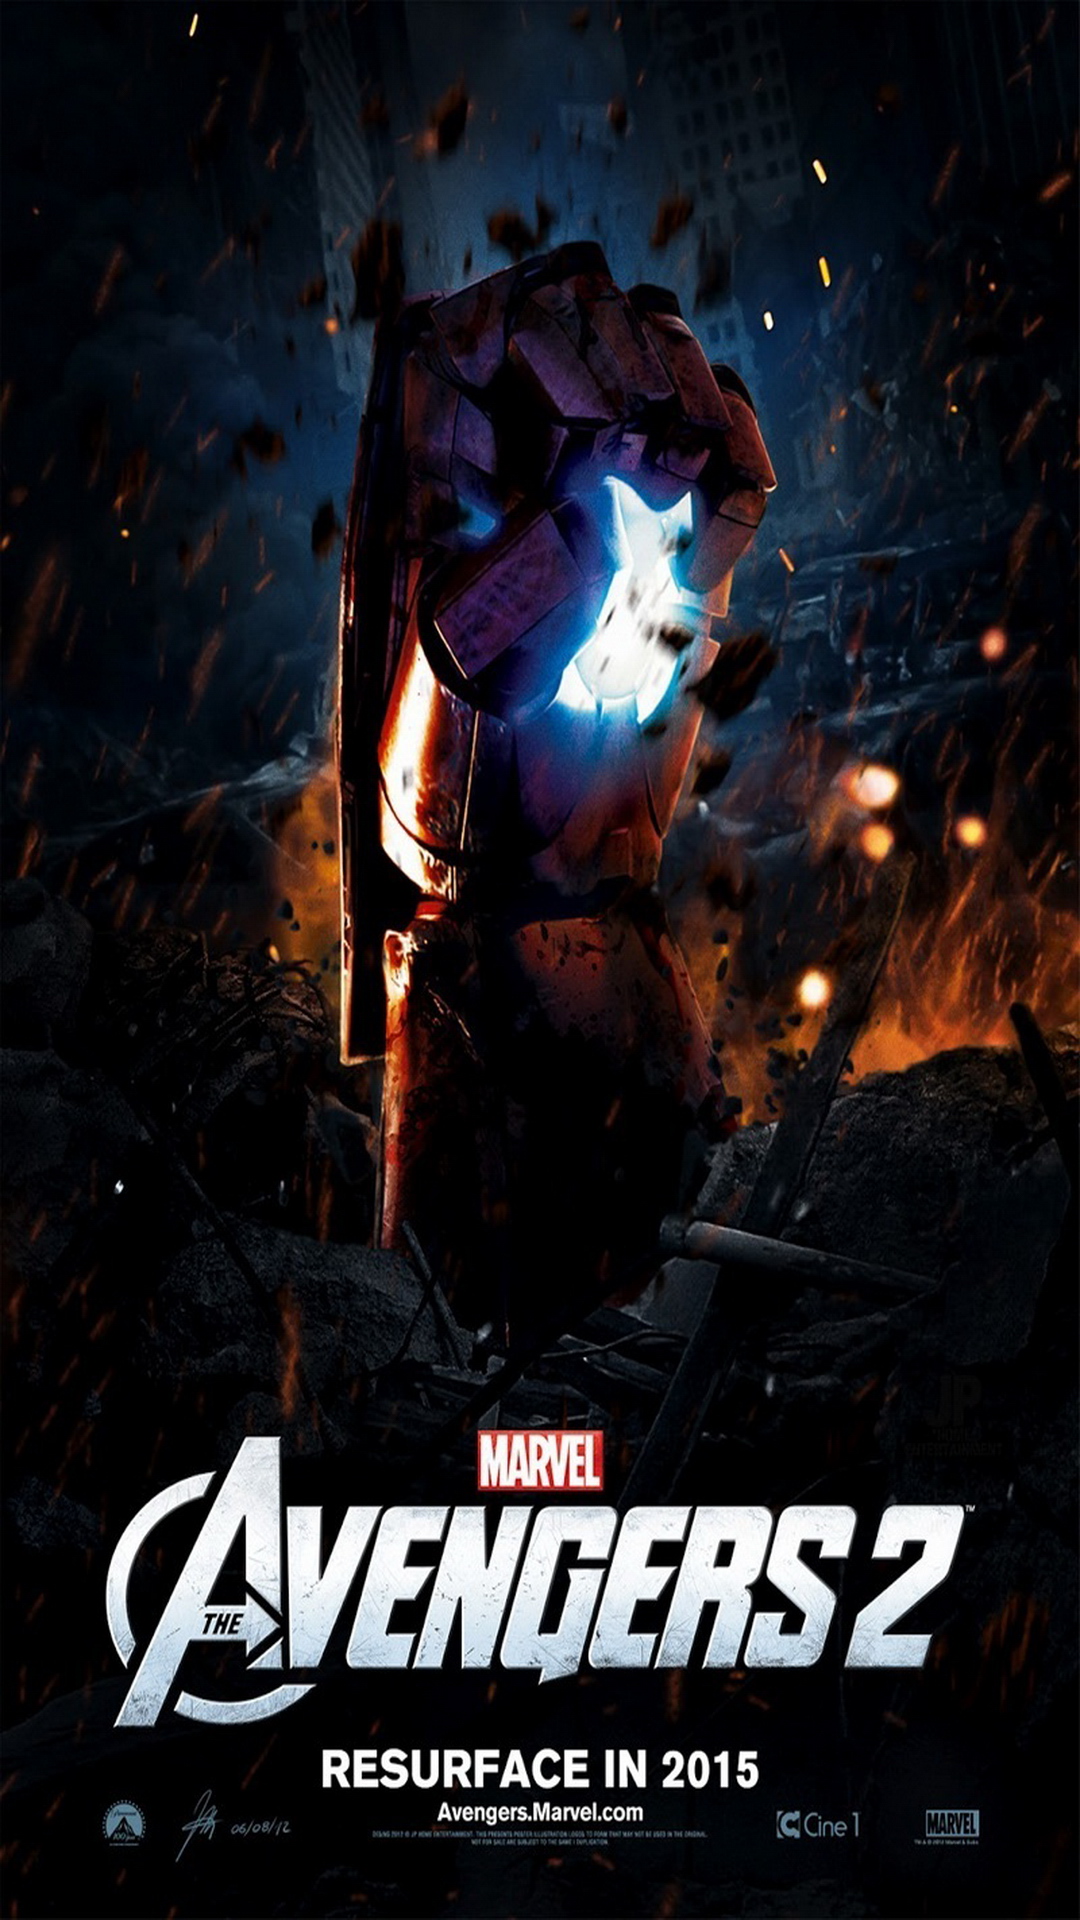 Funmozar The Avengers Age Of Ultron iPhone Wallpaper